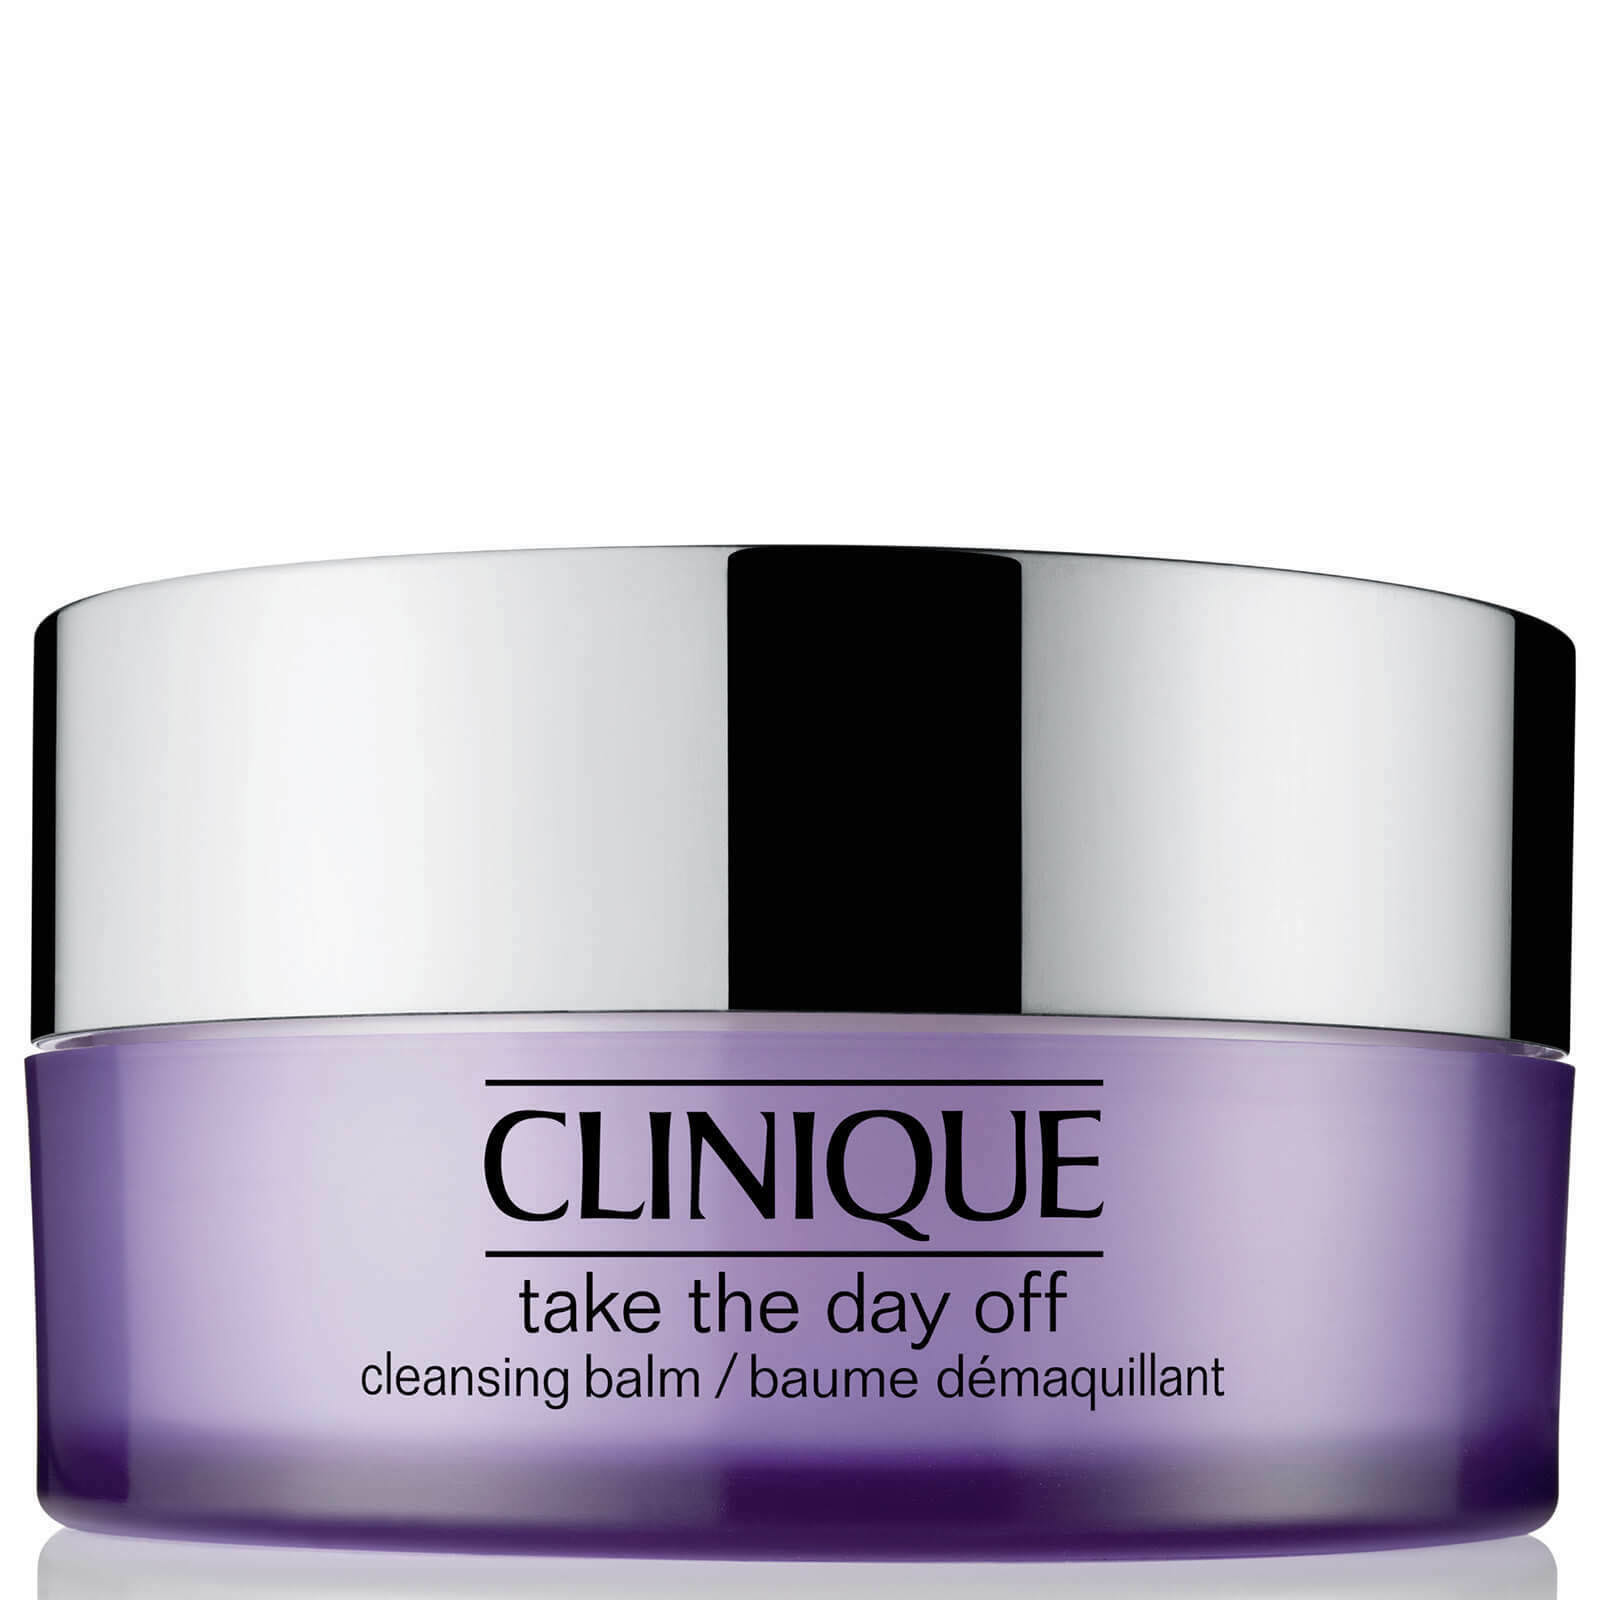 Clinique - Take Off The Day Cleansing Balm 125 ml